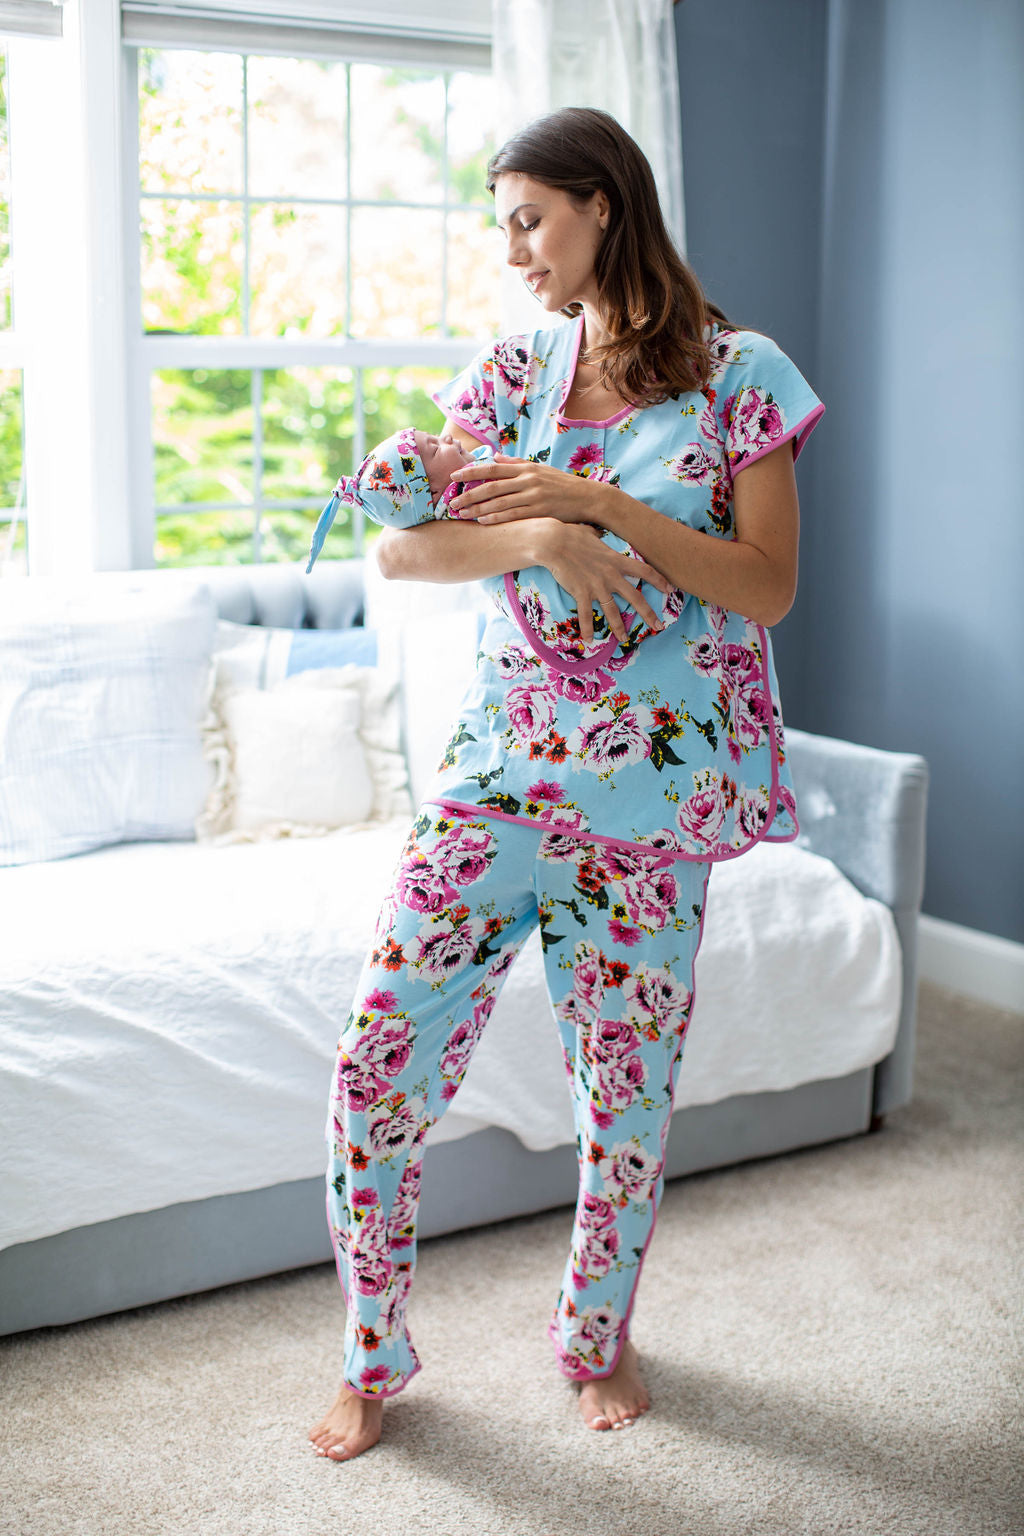 Pregnancy Pajamas: How To Find High-Quality Maternity PJs – Babe